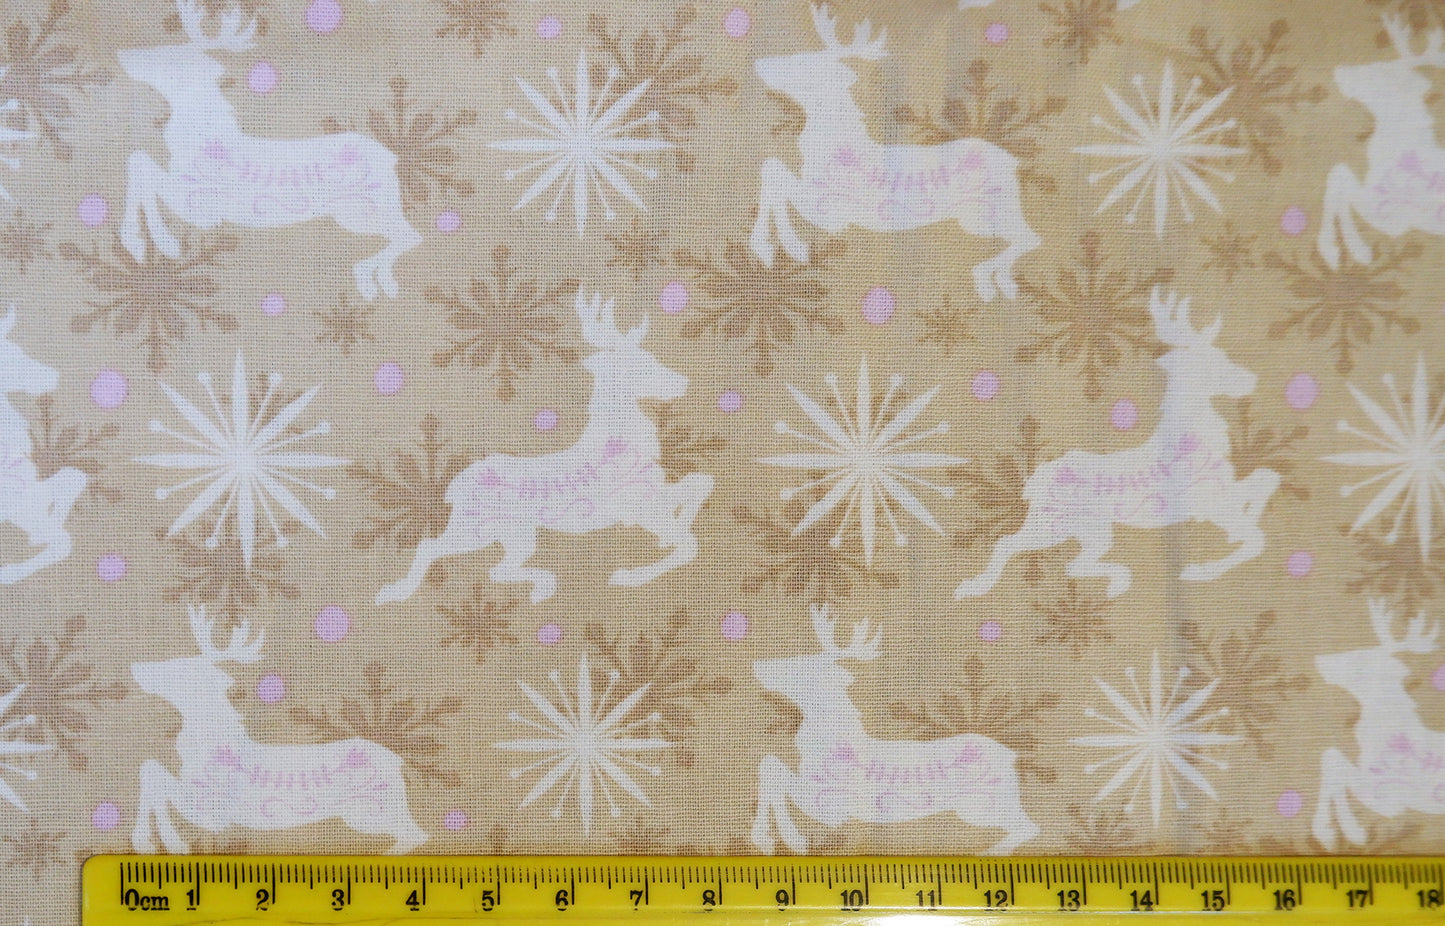 Cotton Fabric - Reindeer and Snowflakes on Beige